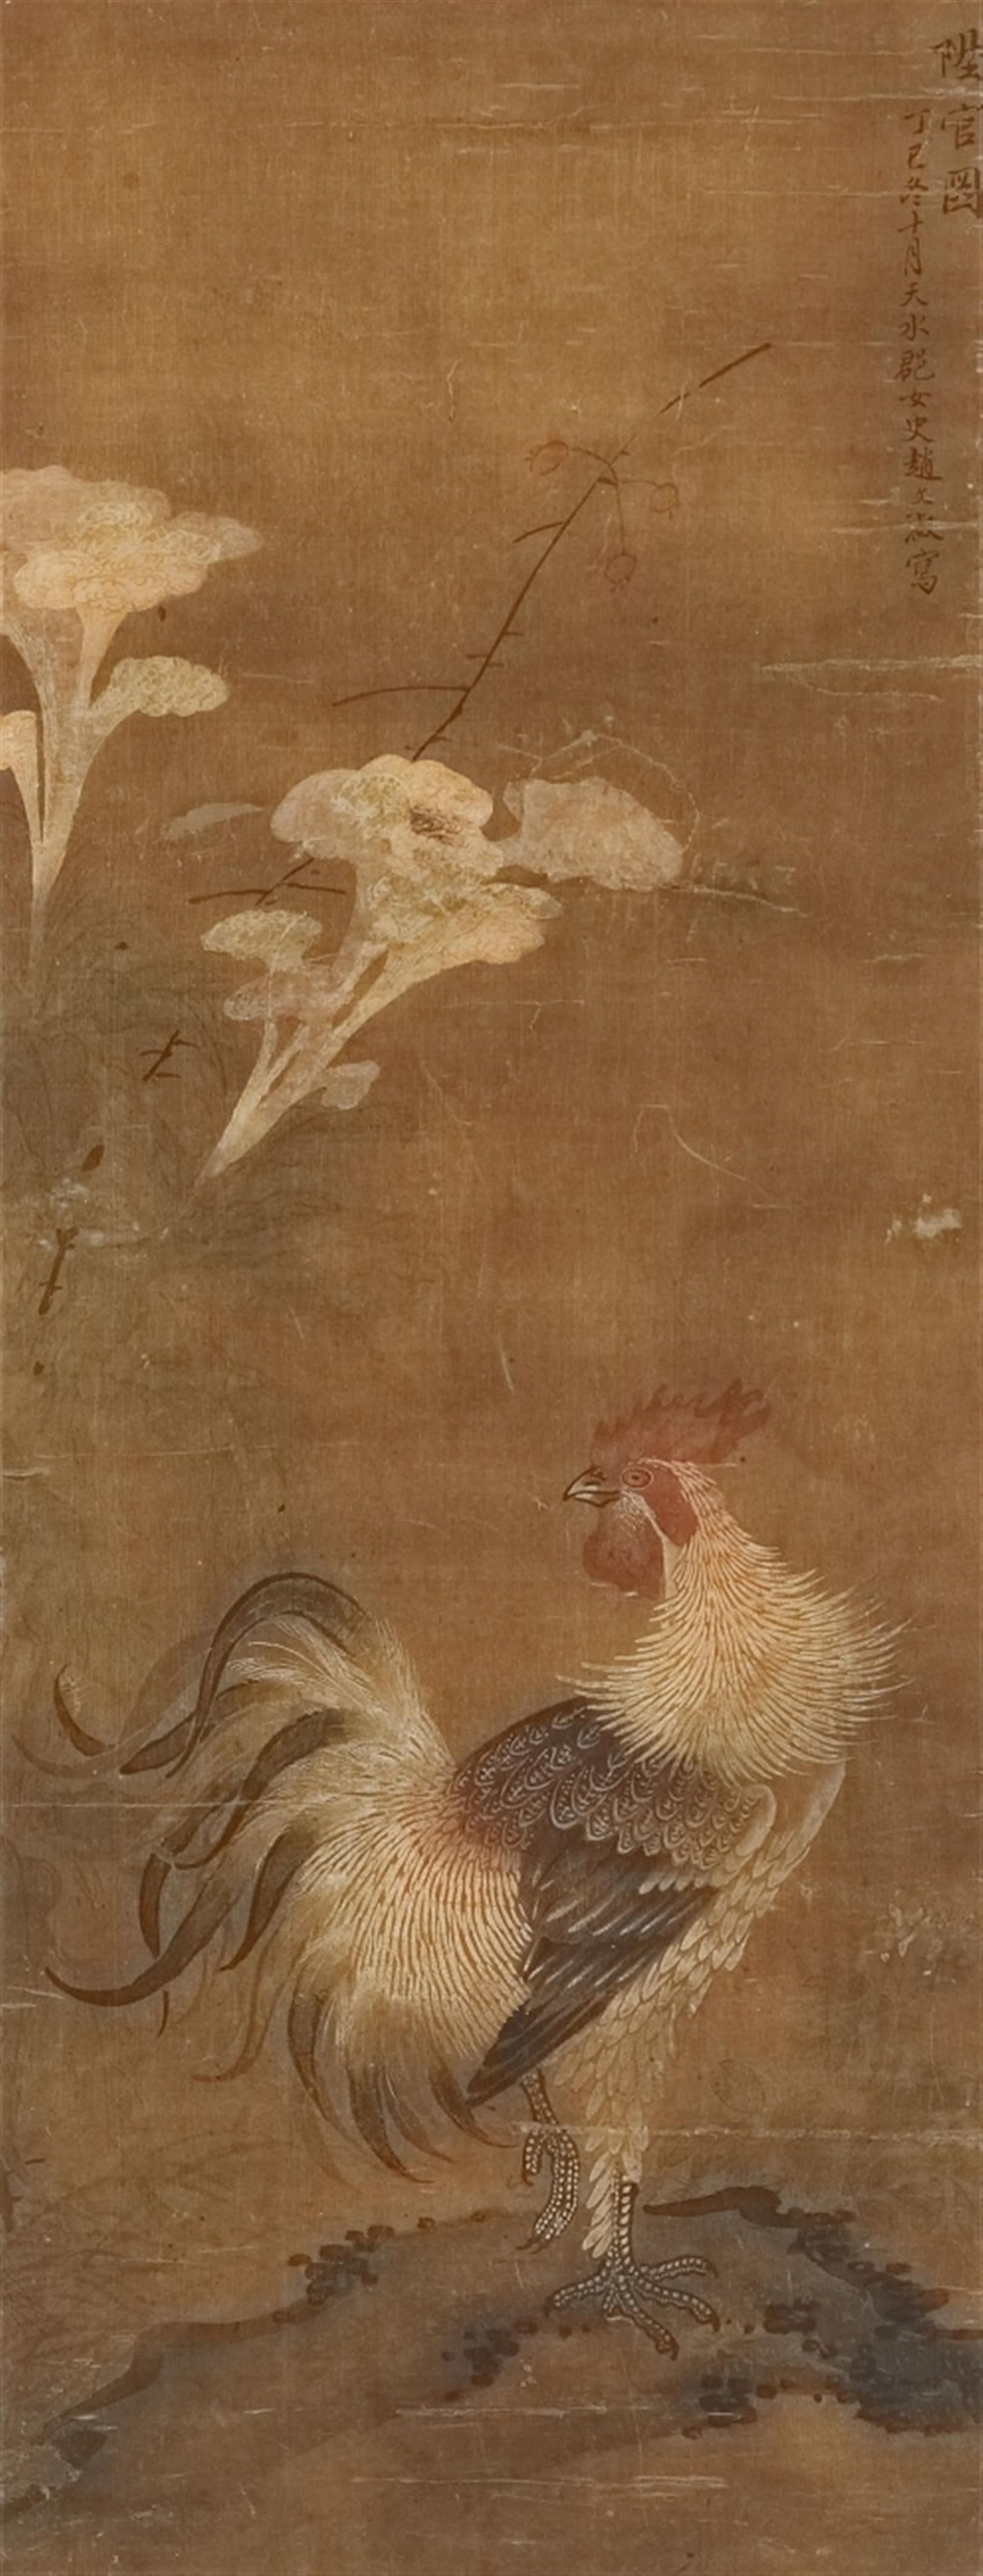 Zhao Wenshu . Qing dynasty - A rooster on a rock and cock's comb flowers. Hanging scroll. Ink and colour on silk. Inscription dated cyclically dingsi and signed Zhao Wenshu. - image-1